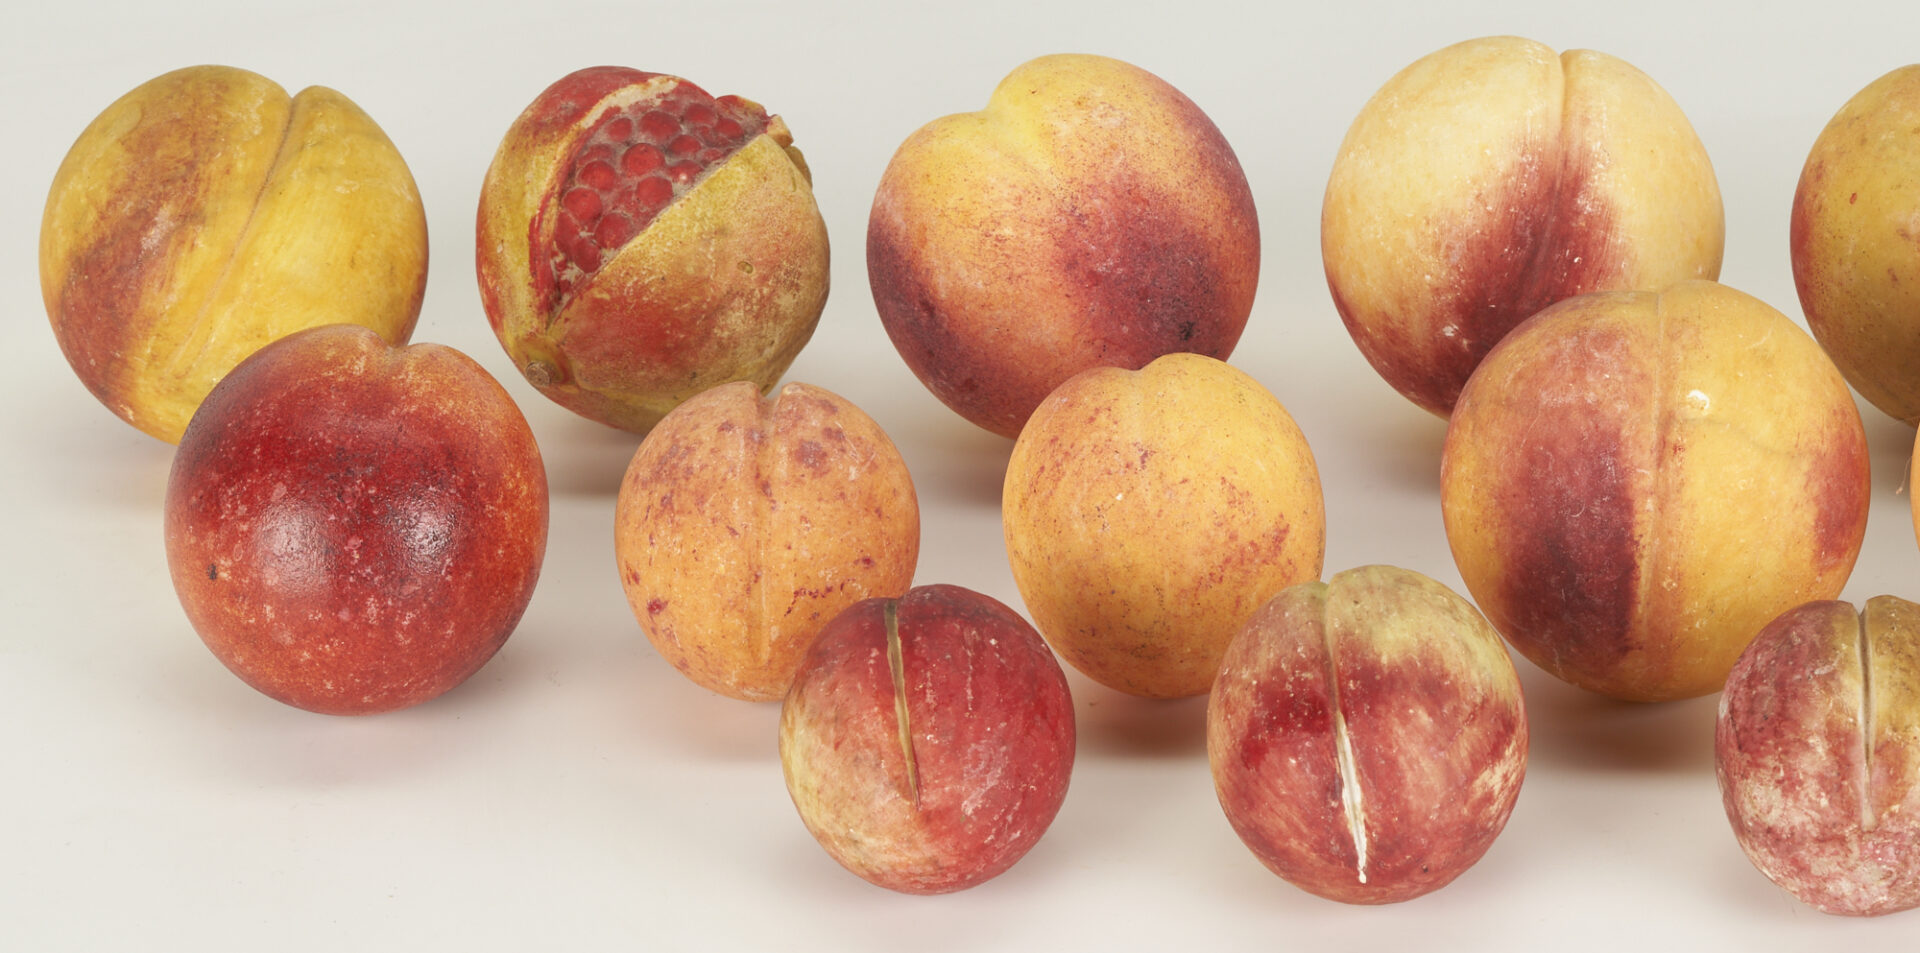 Lot 295: Stone Fruit w/ Carved Wood Bowl